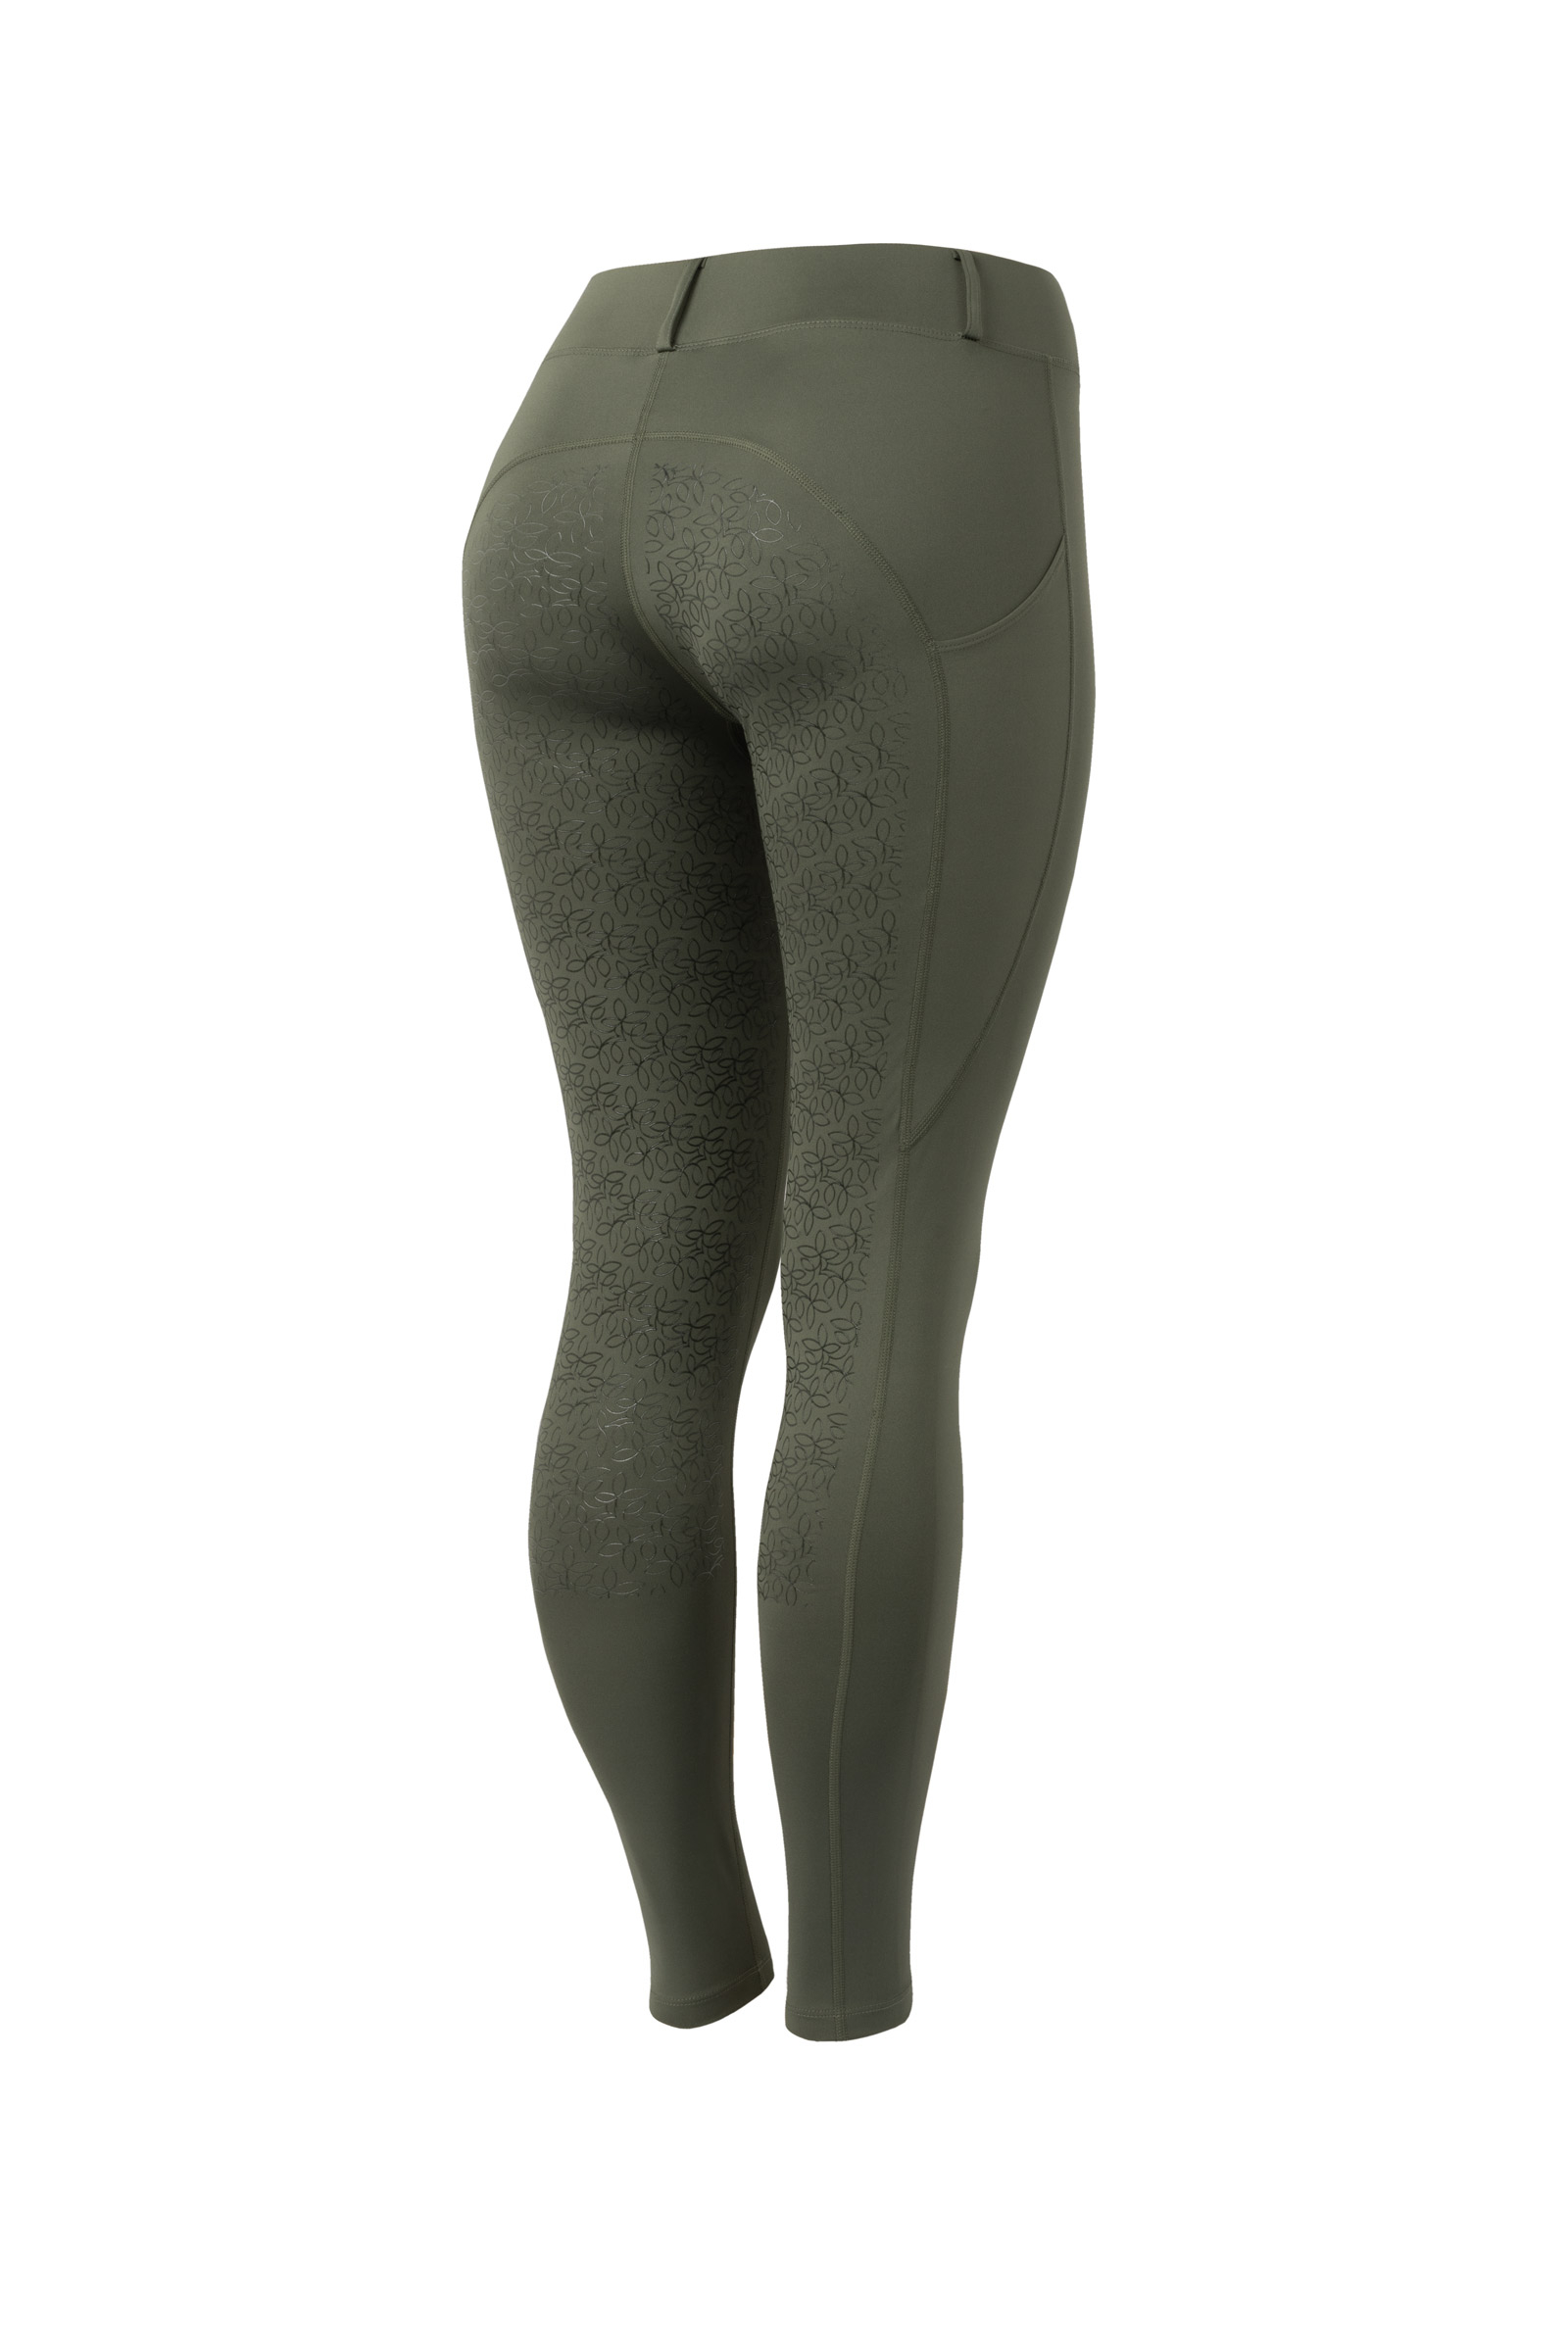 Horze Ginny Maternity Full Seat Tights at Tractor Supply Co.